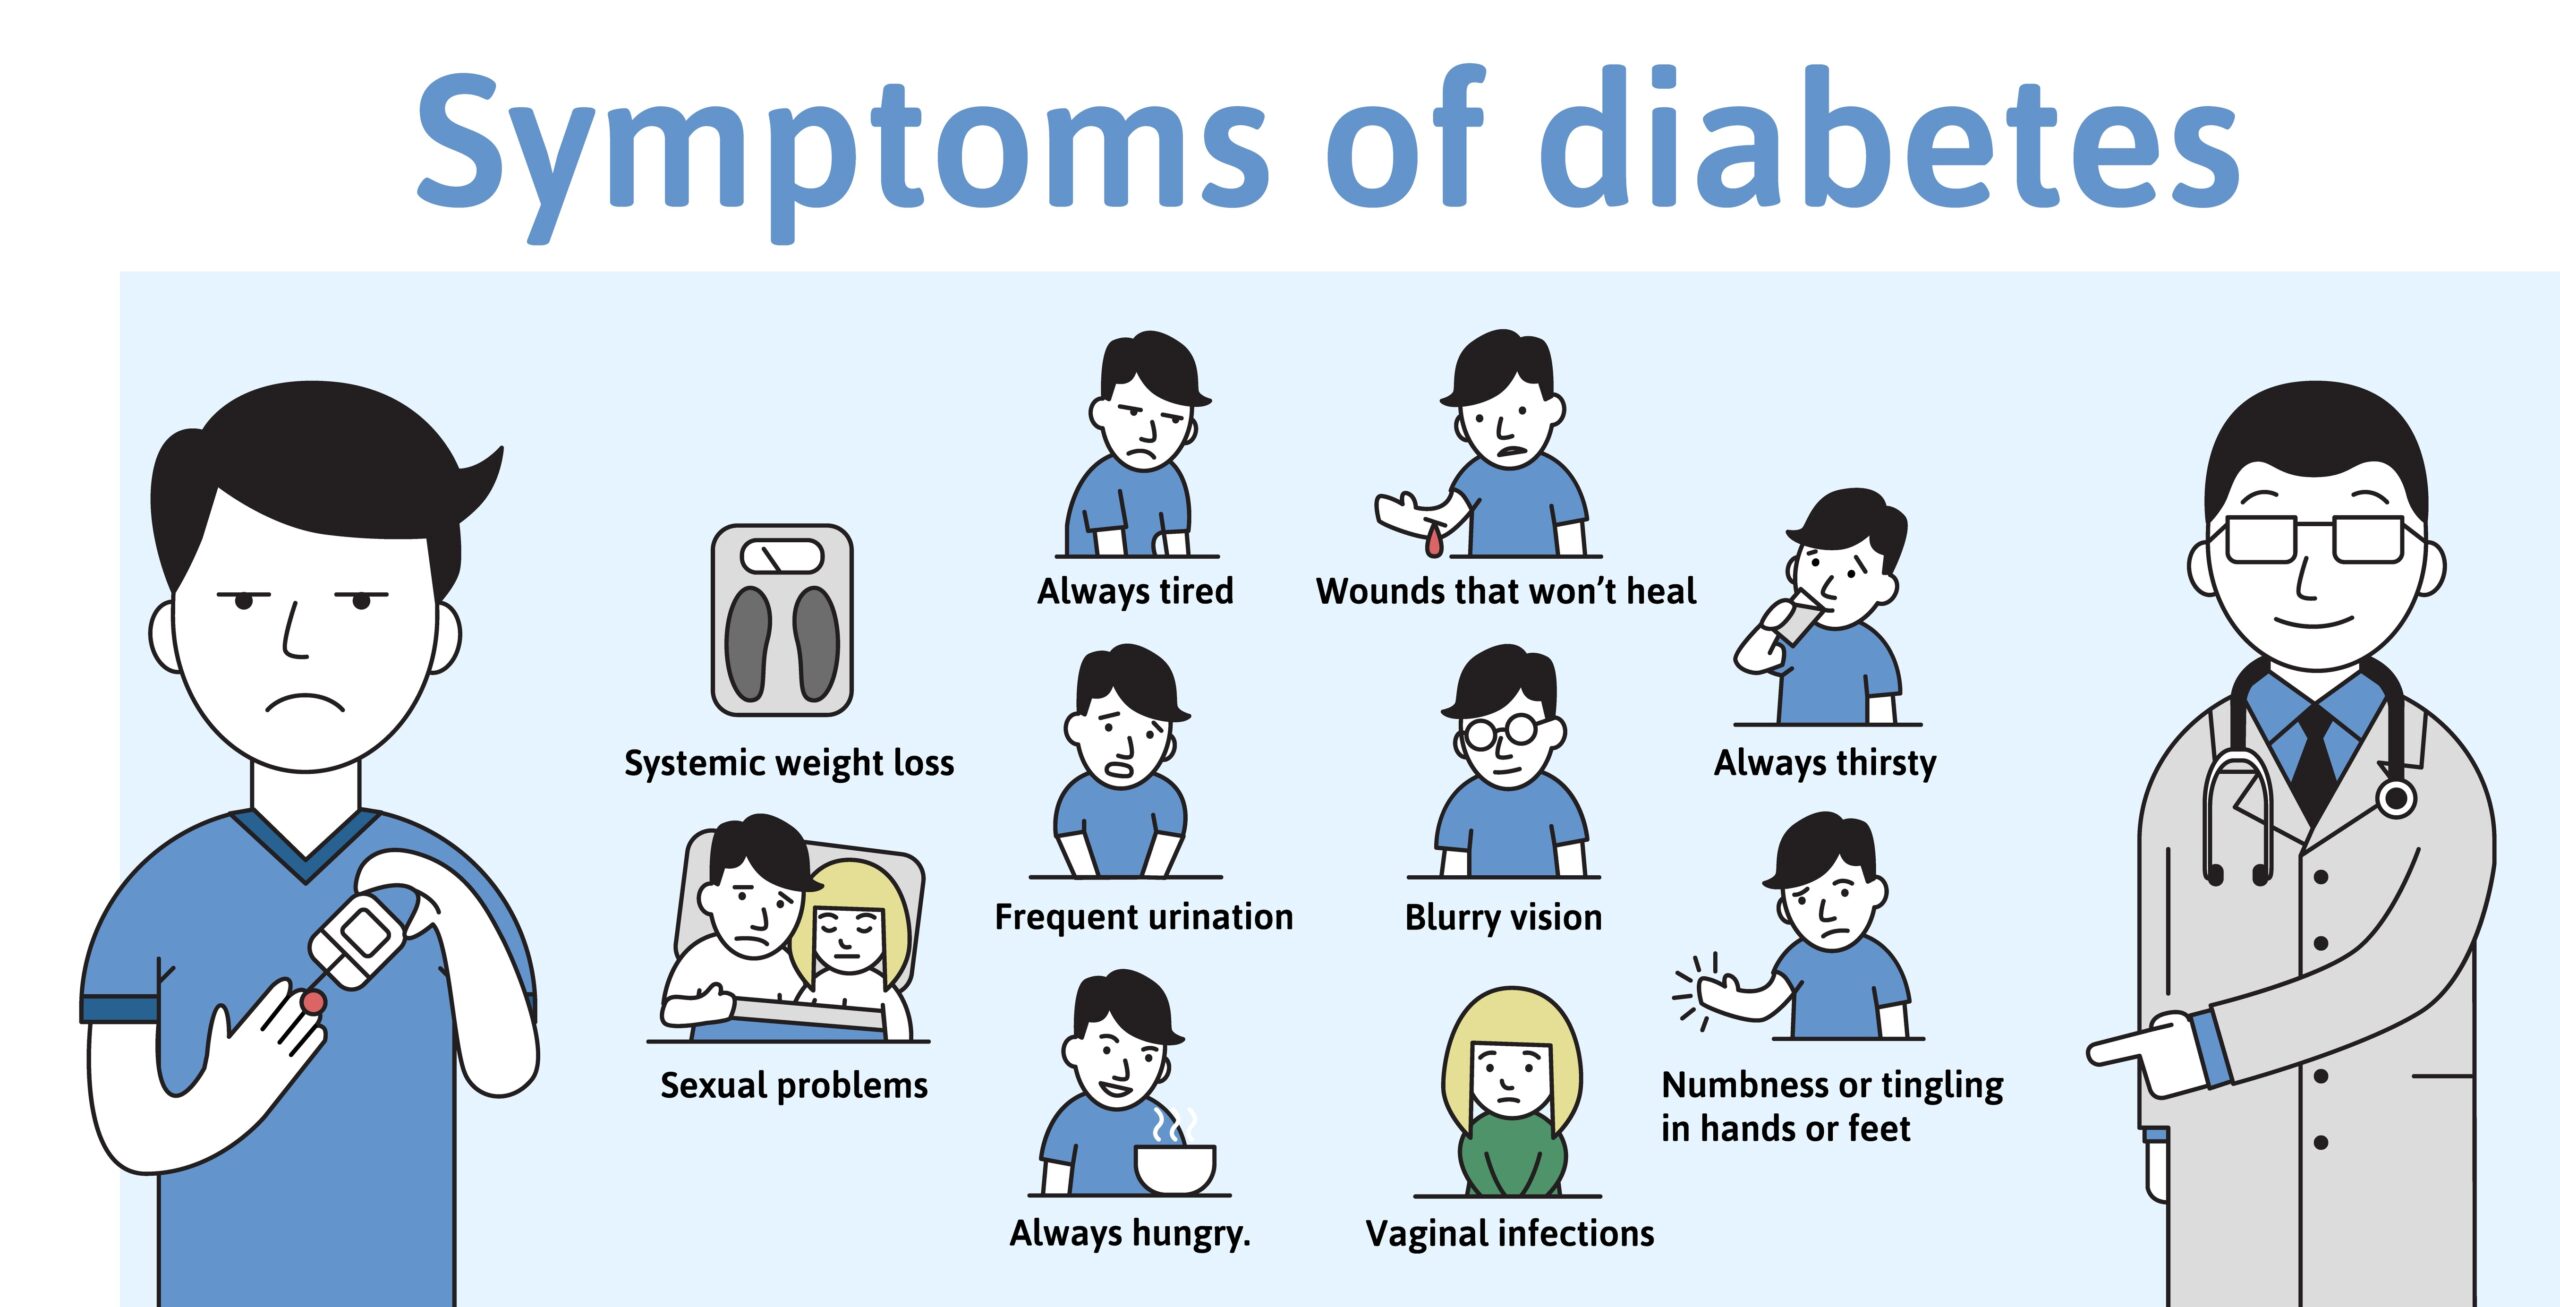 An illustration depicting a young man with diabetes, a doctor, and a list of symptoms. 